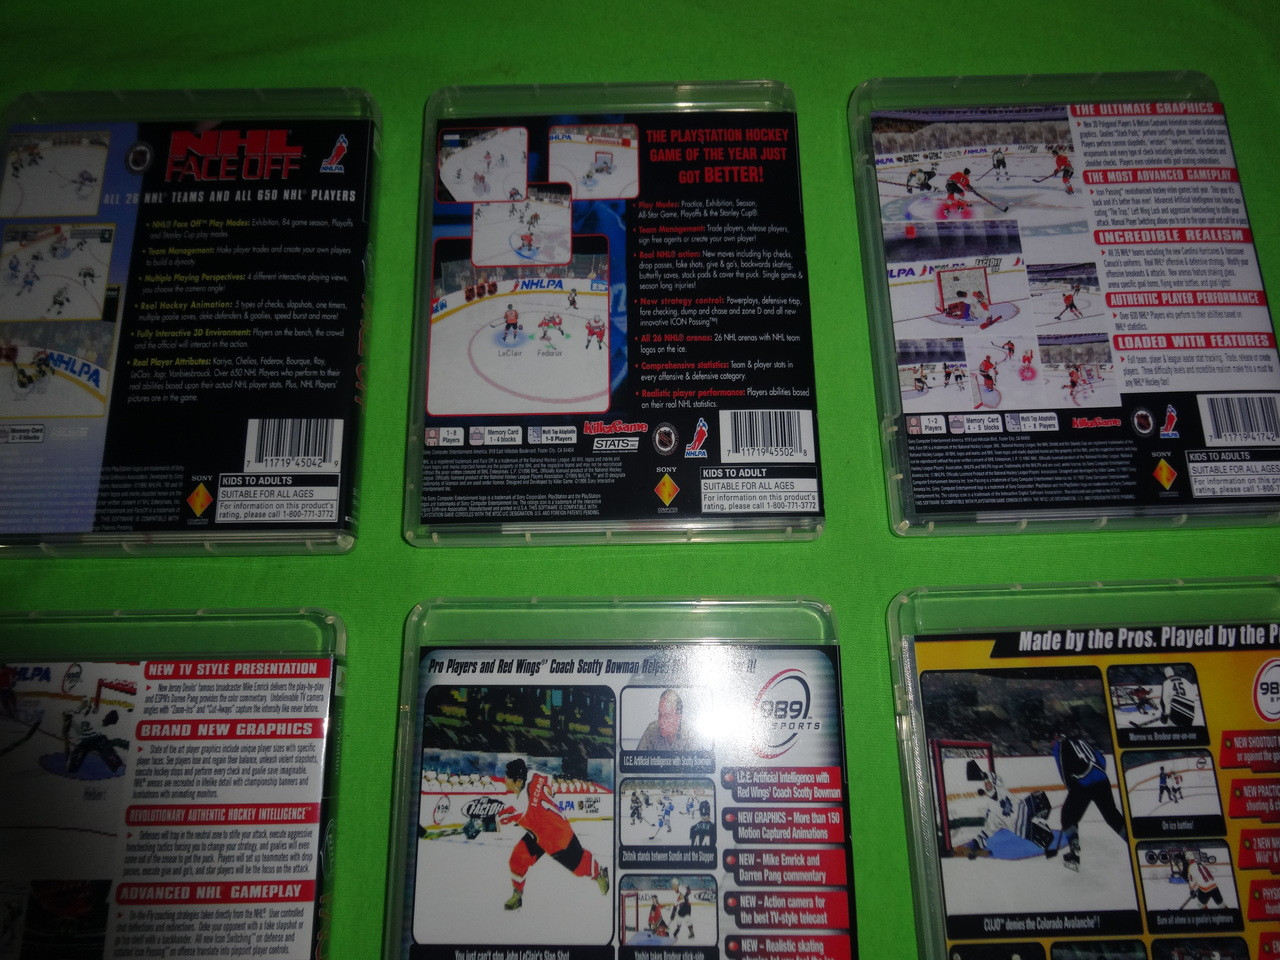 Sony PlayStation MausKlick NHL 01 Console - Consolevariations